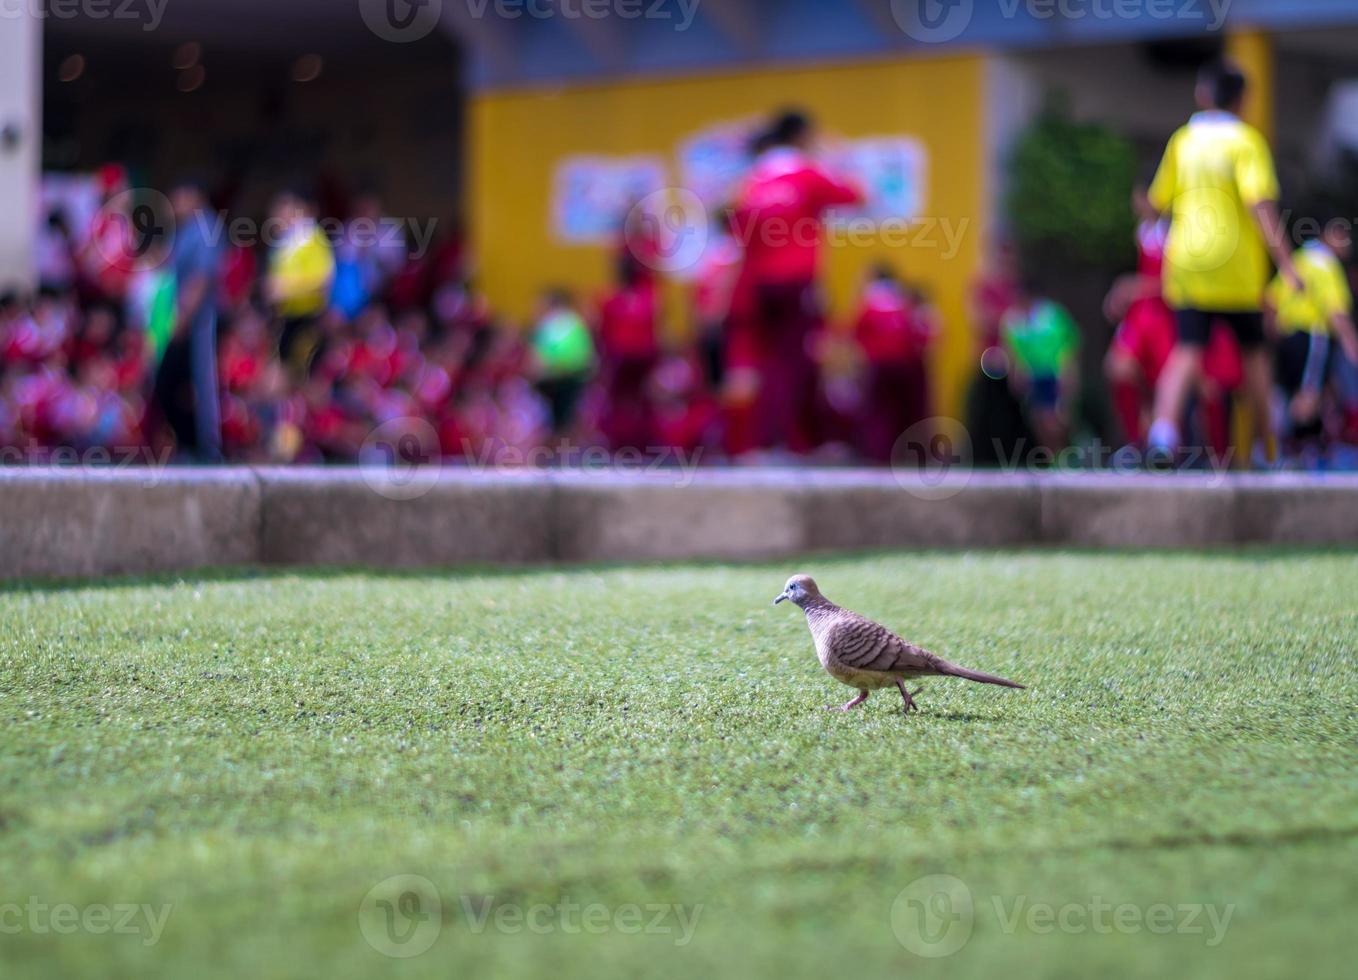 Dove walks on the lawn of artificial grass photo